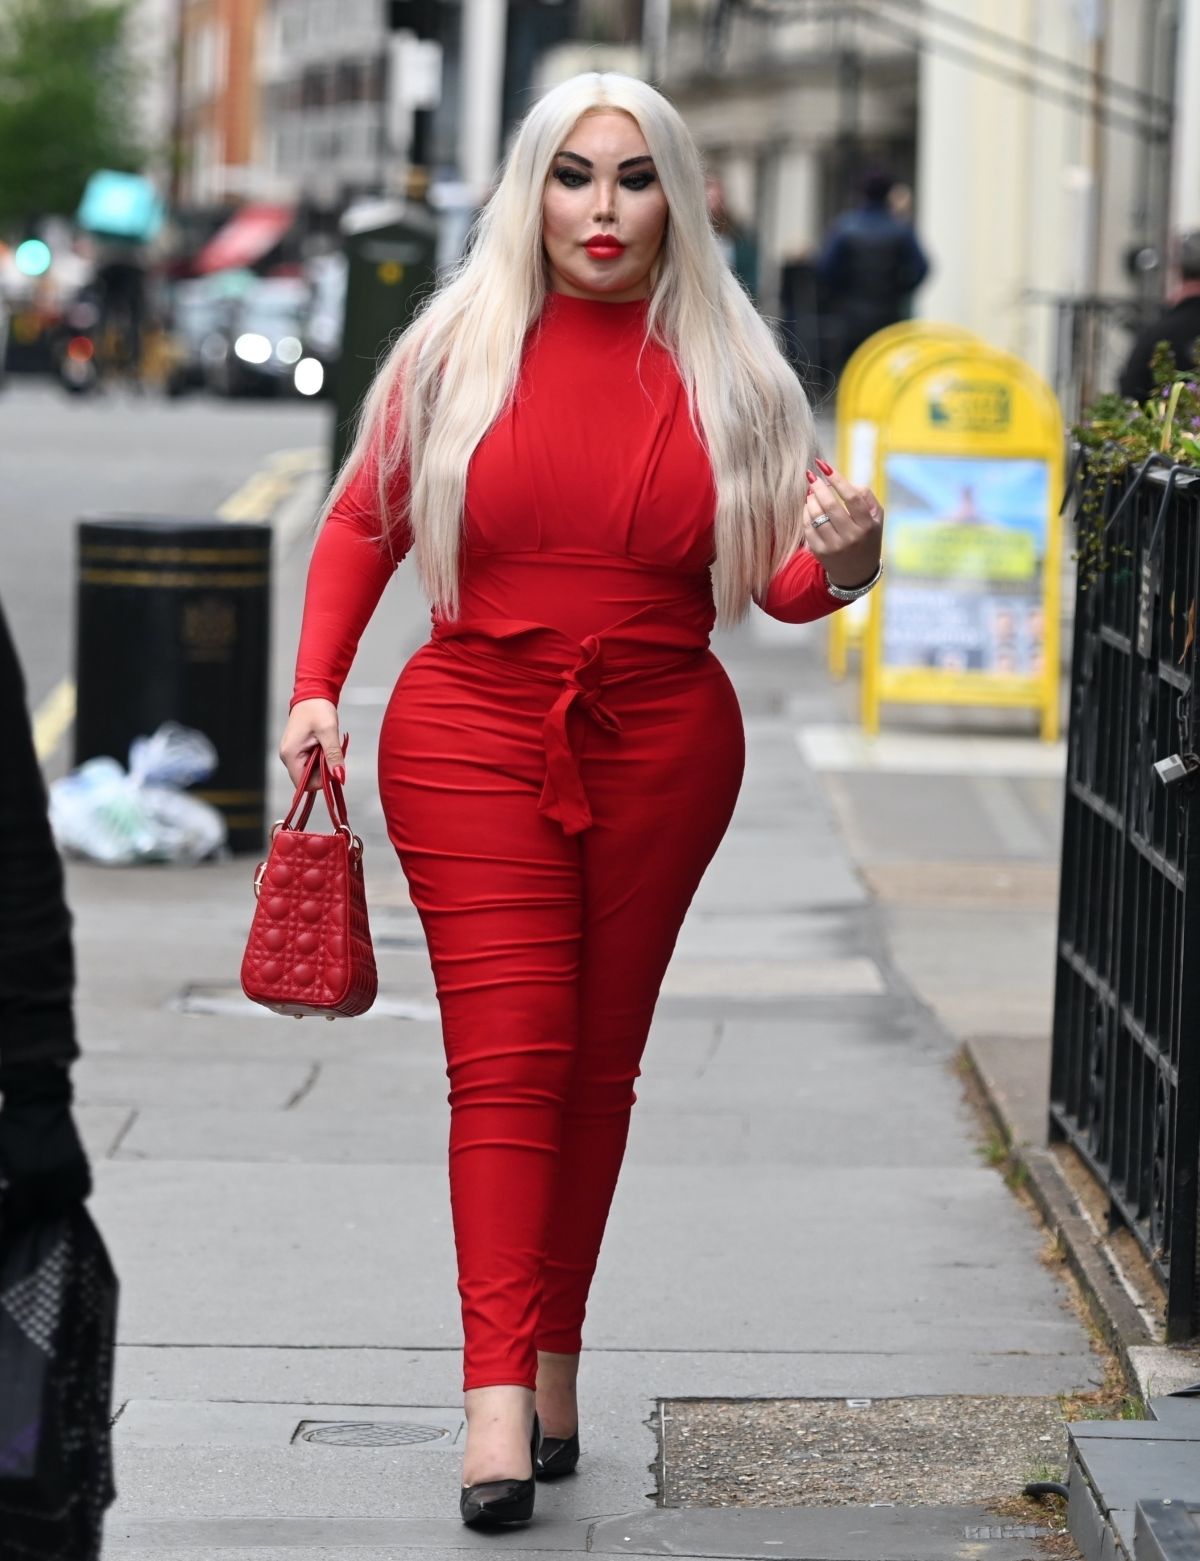 jessica-alves-all-in-red-out-and-about-in-london-05-15-2021-6.jpg